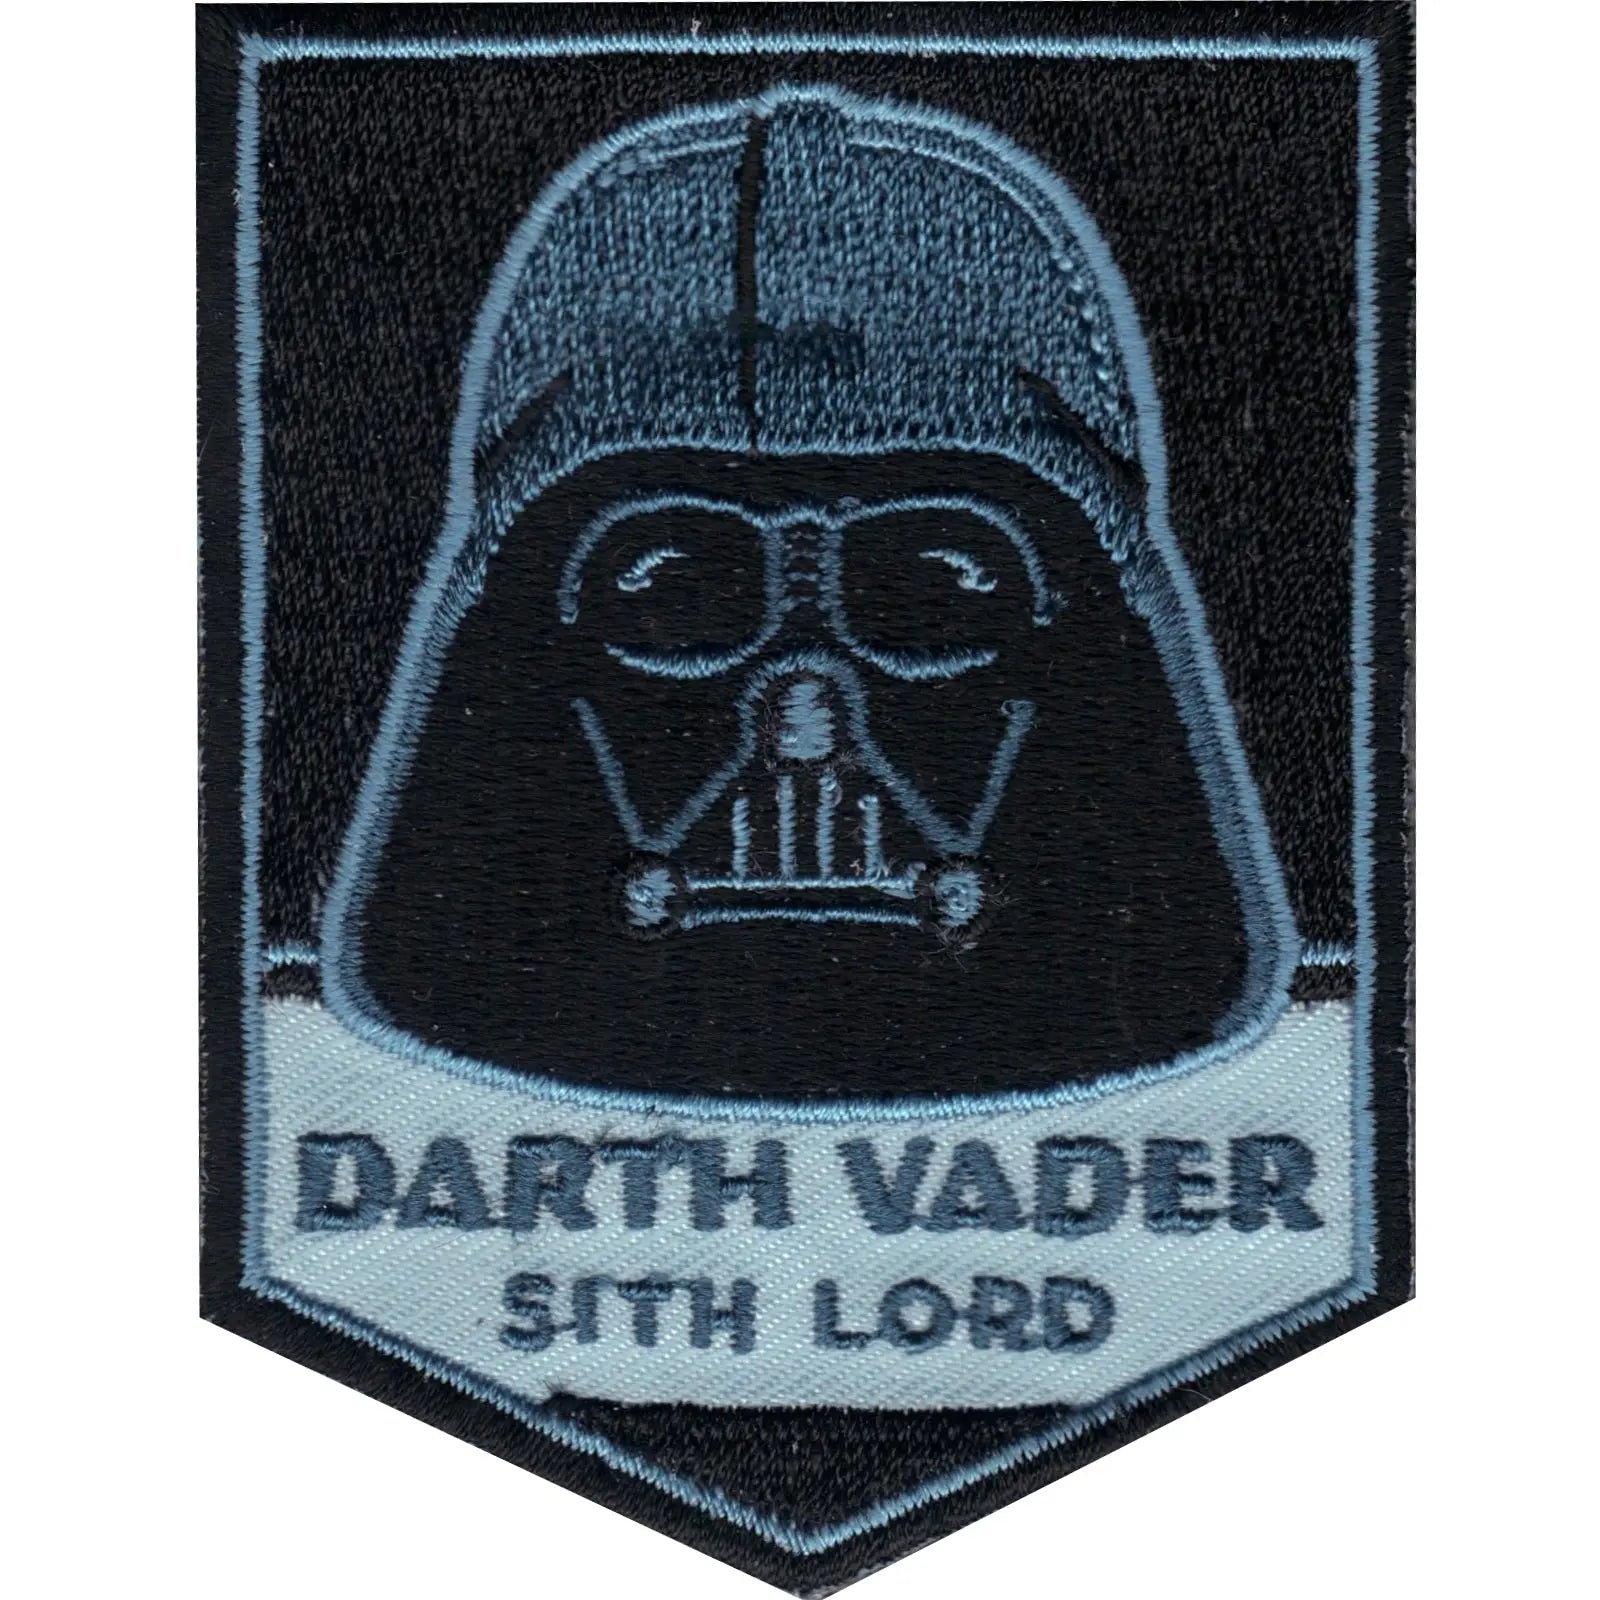 Star Wars Official Darth Vader 'Sith Lord' Iron On Patch 